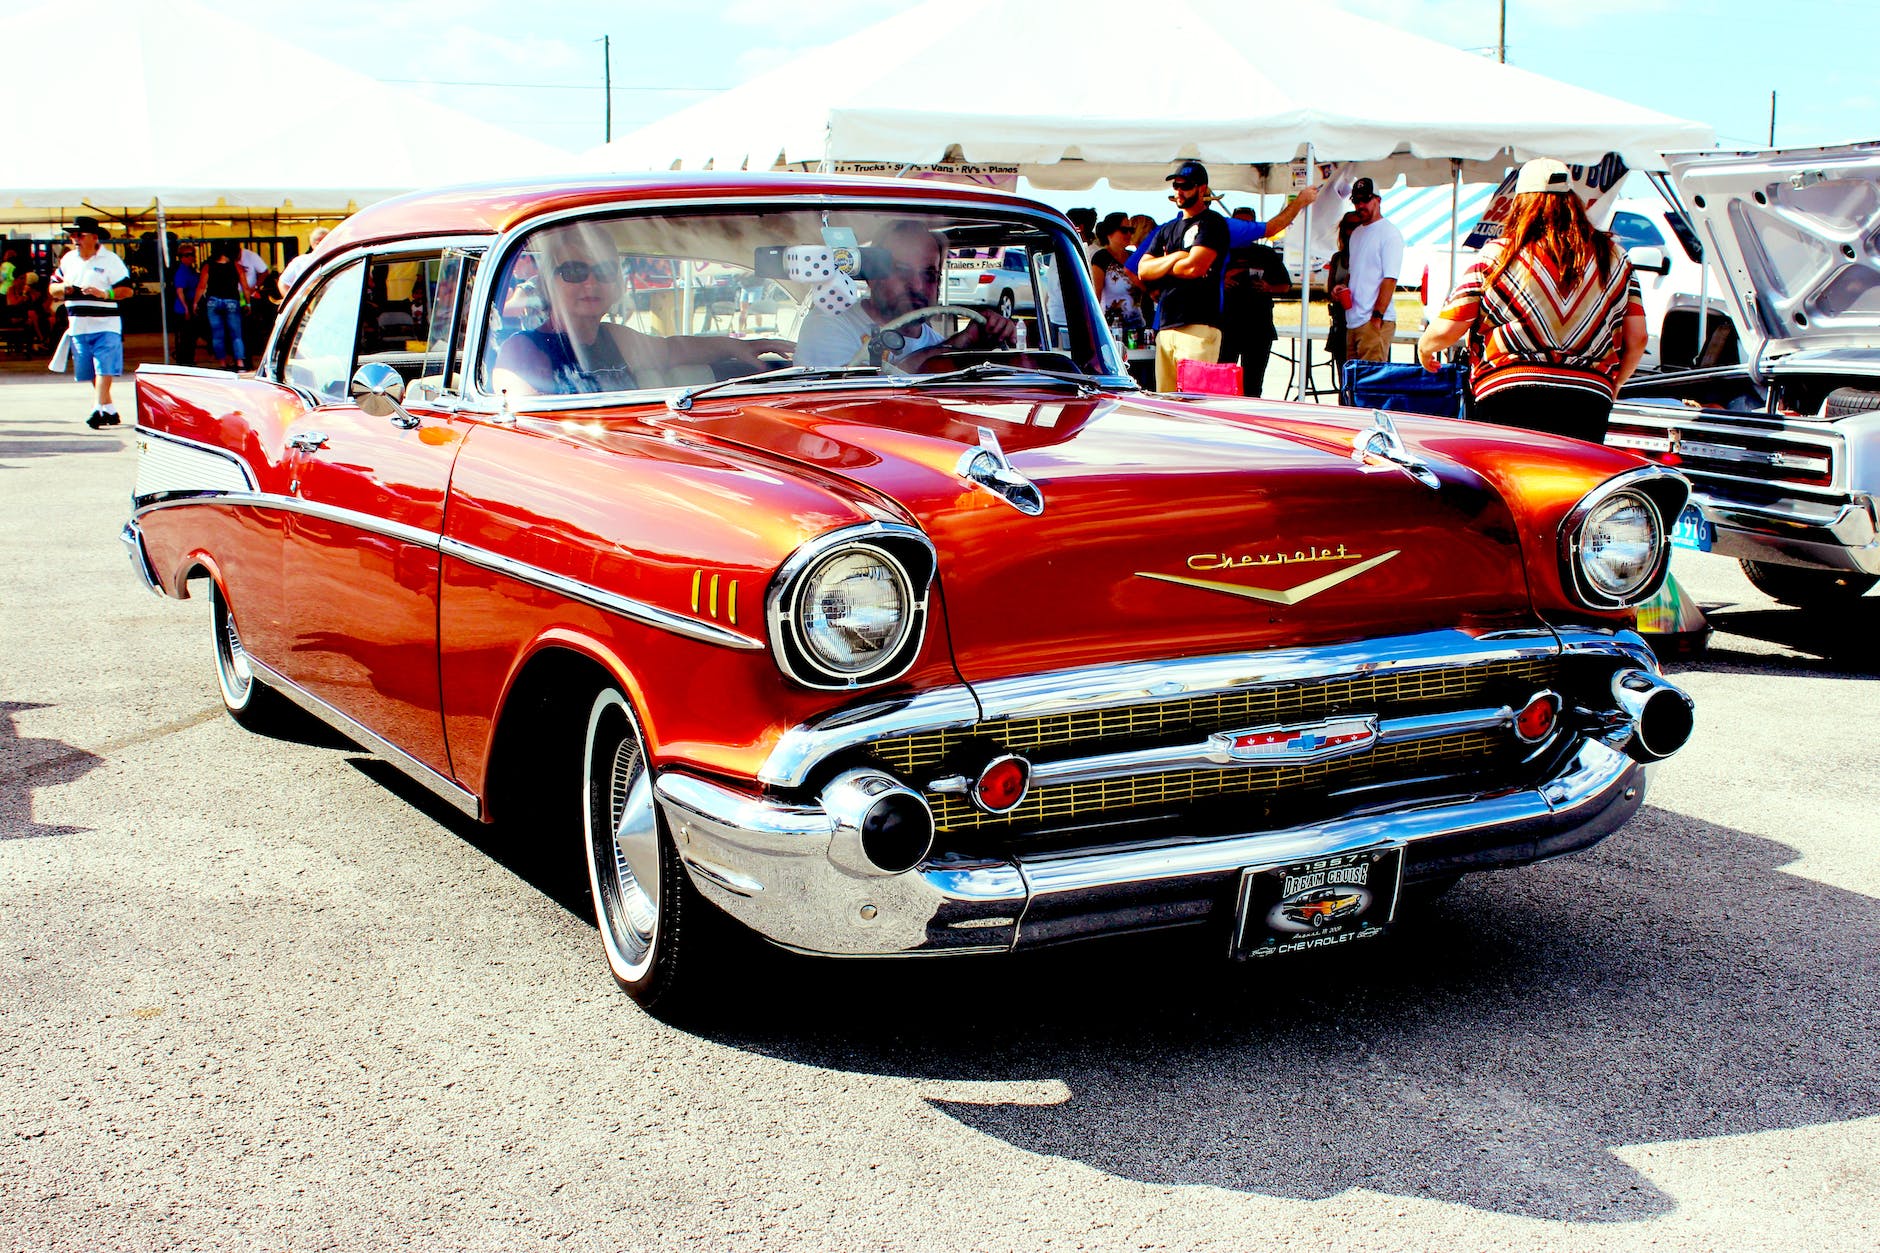 A quintessential red Chevrolet. Guaranteed to bring a smile